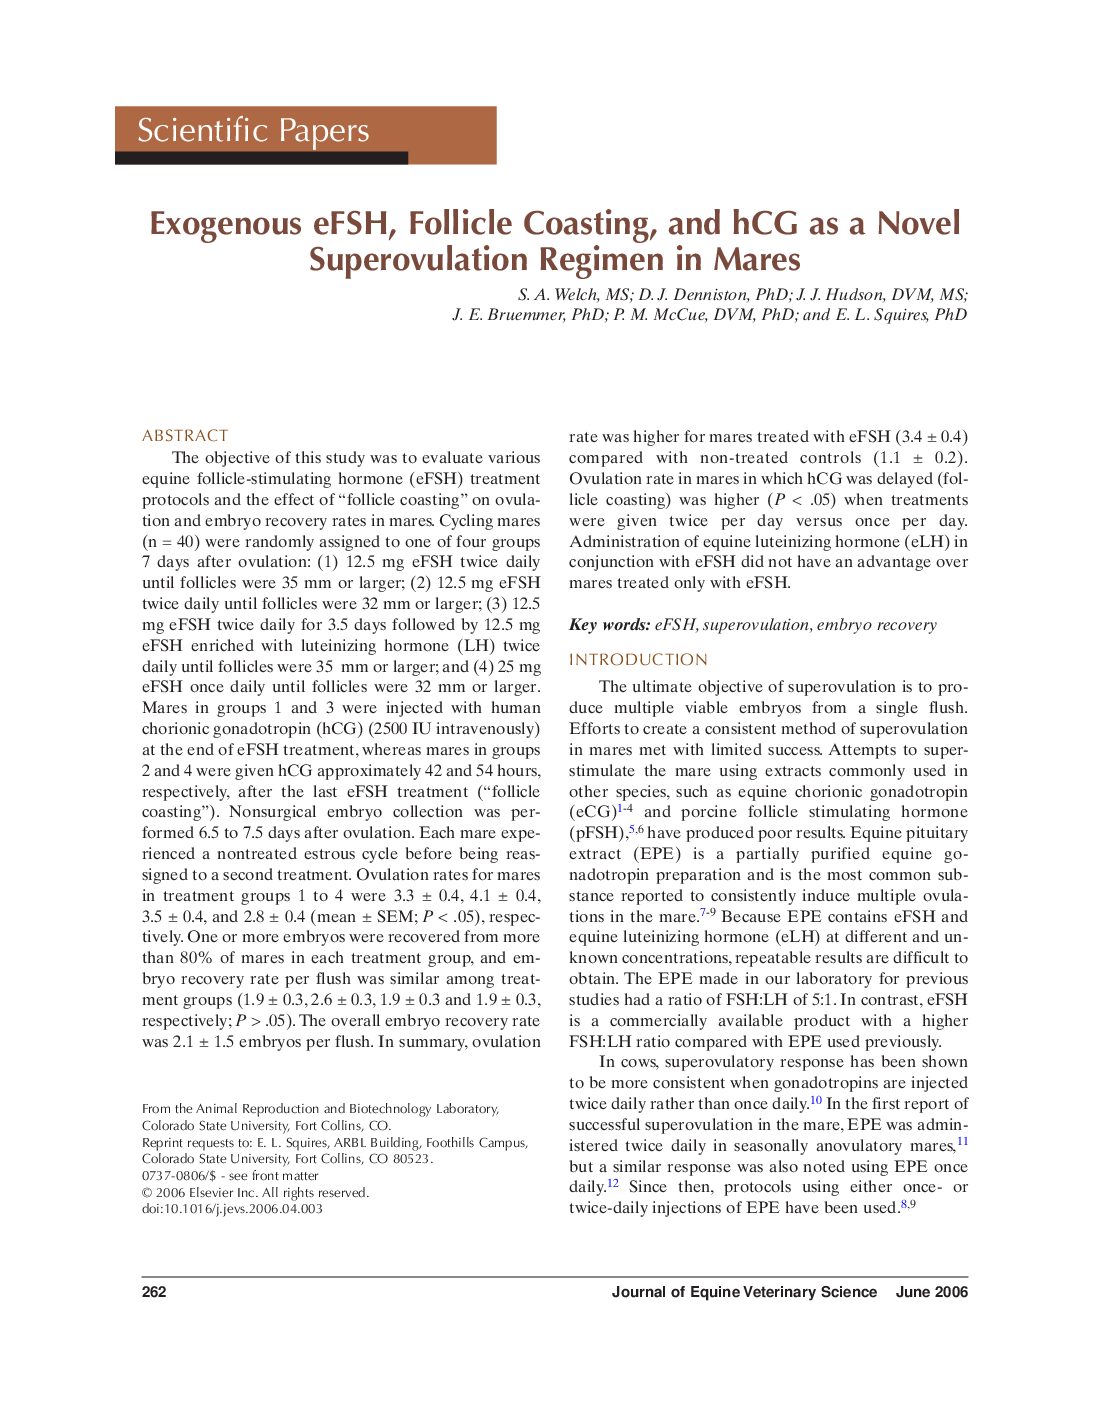 Exogenous eFSH, follicle coasting, and hCG as a novel superovulation regimen in mares